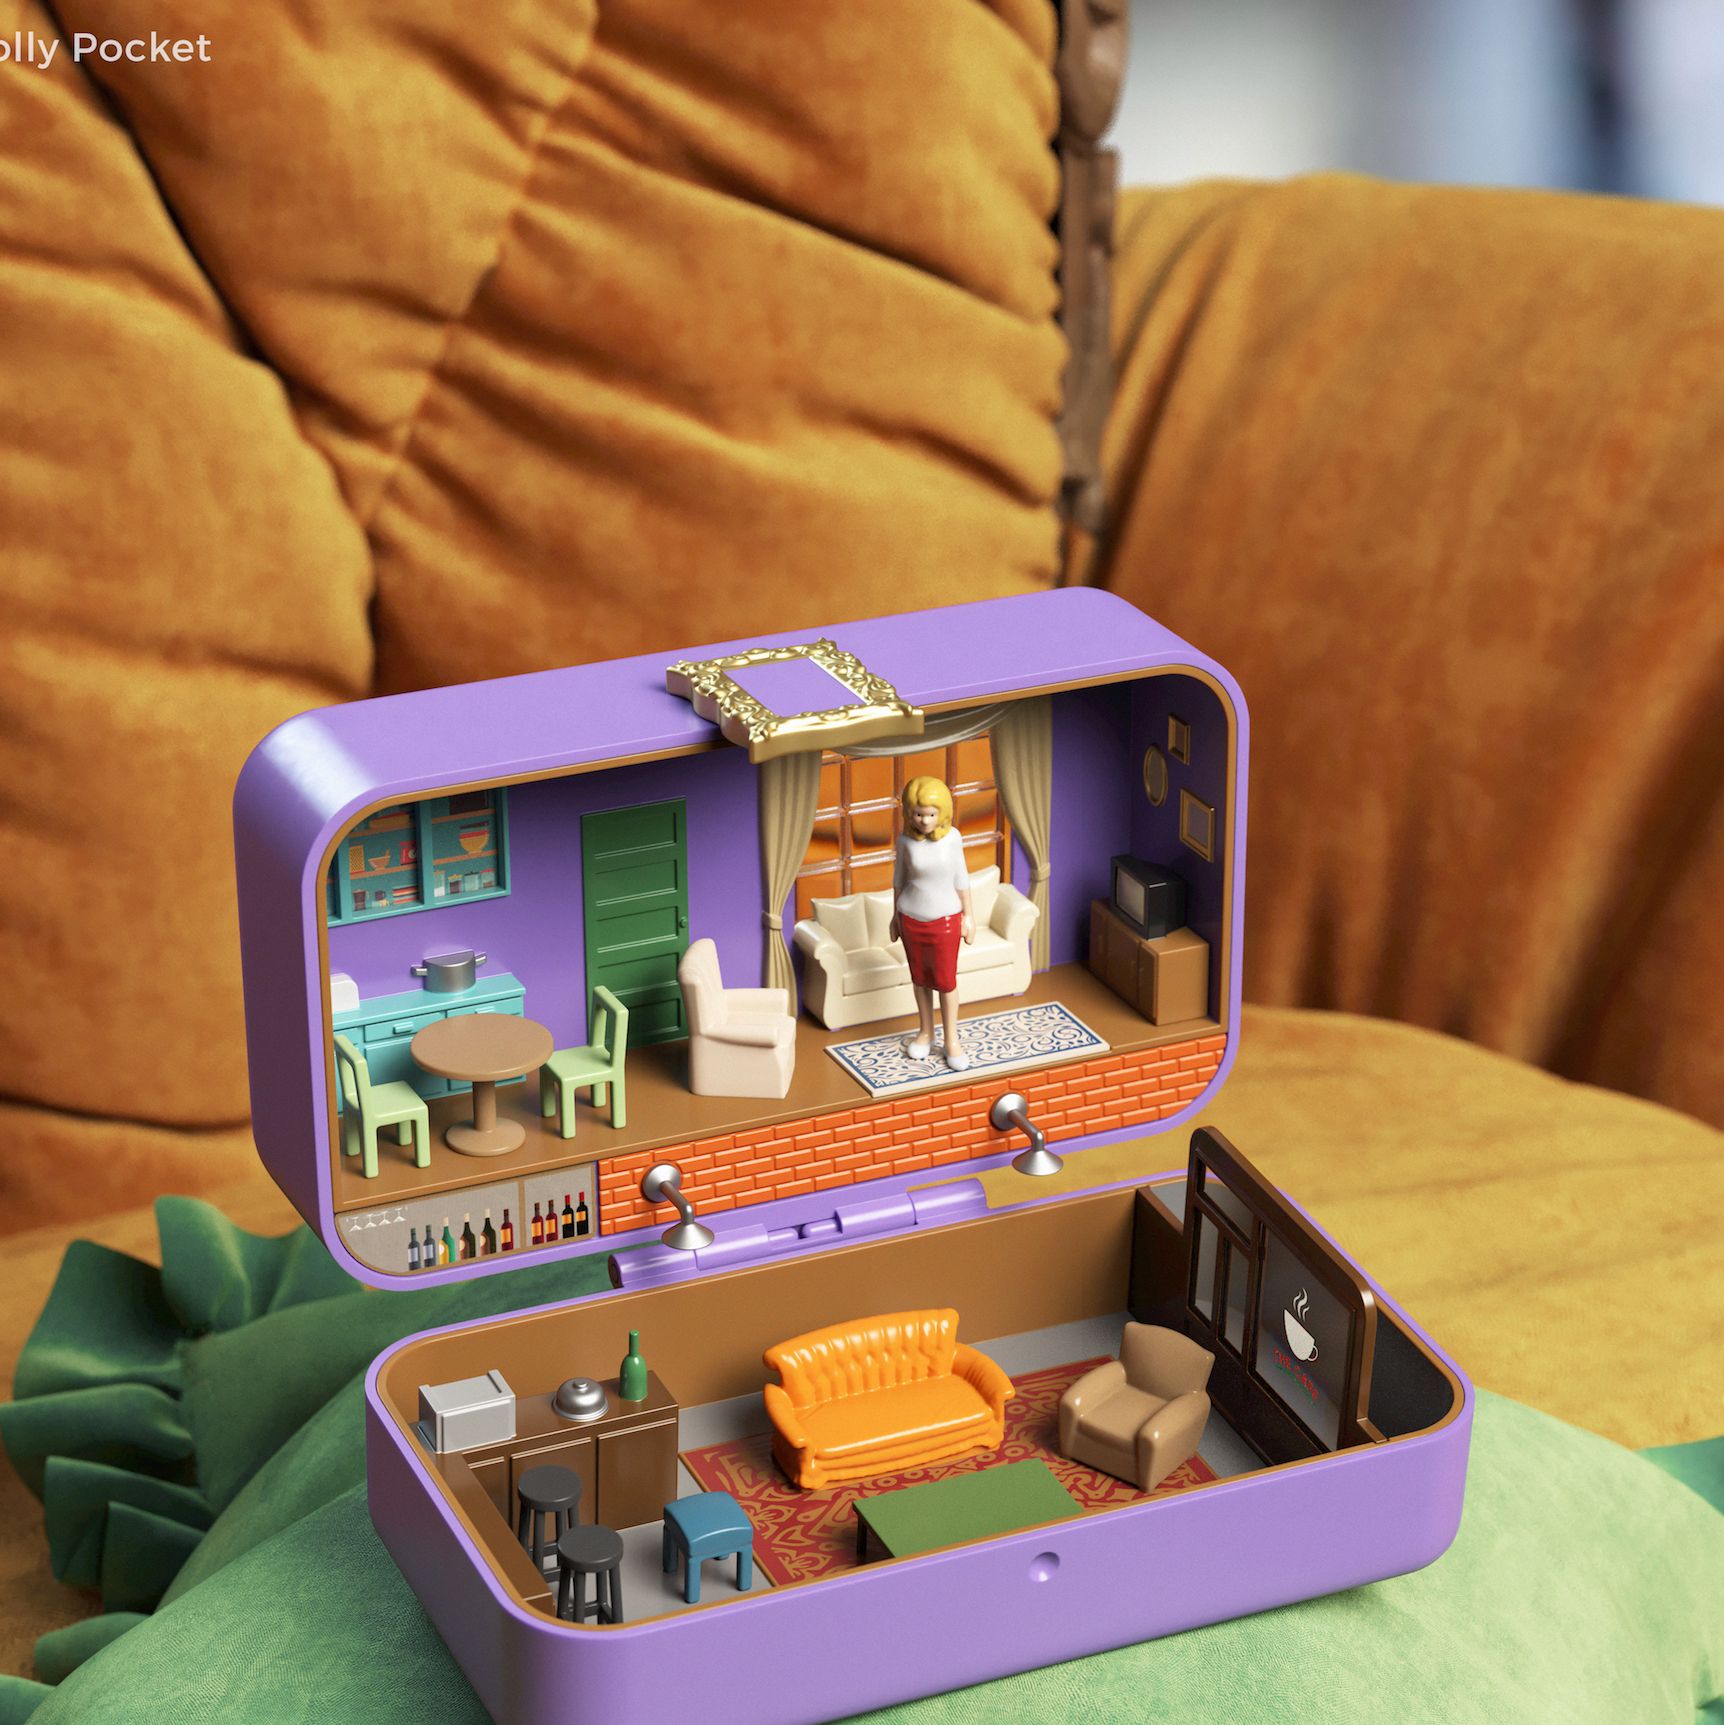 volgens logboek inzet These Famous TV Homes Have Been Given a Polly Pocket Makeover